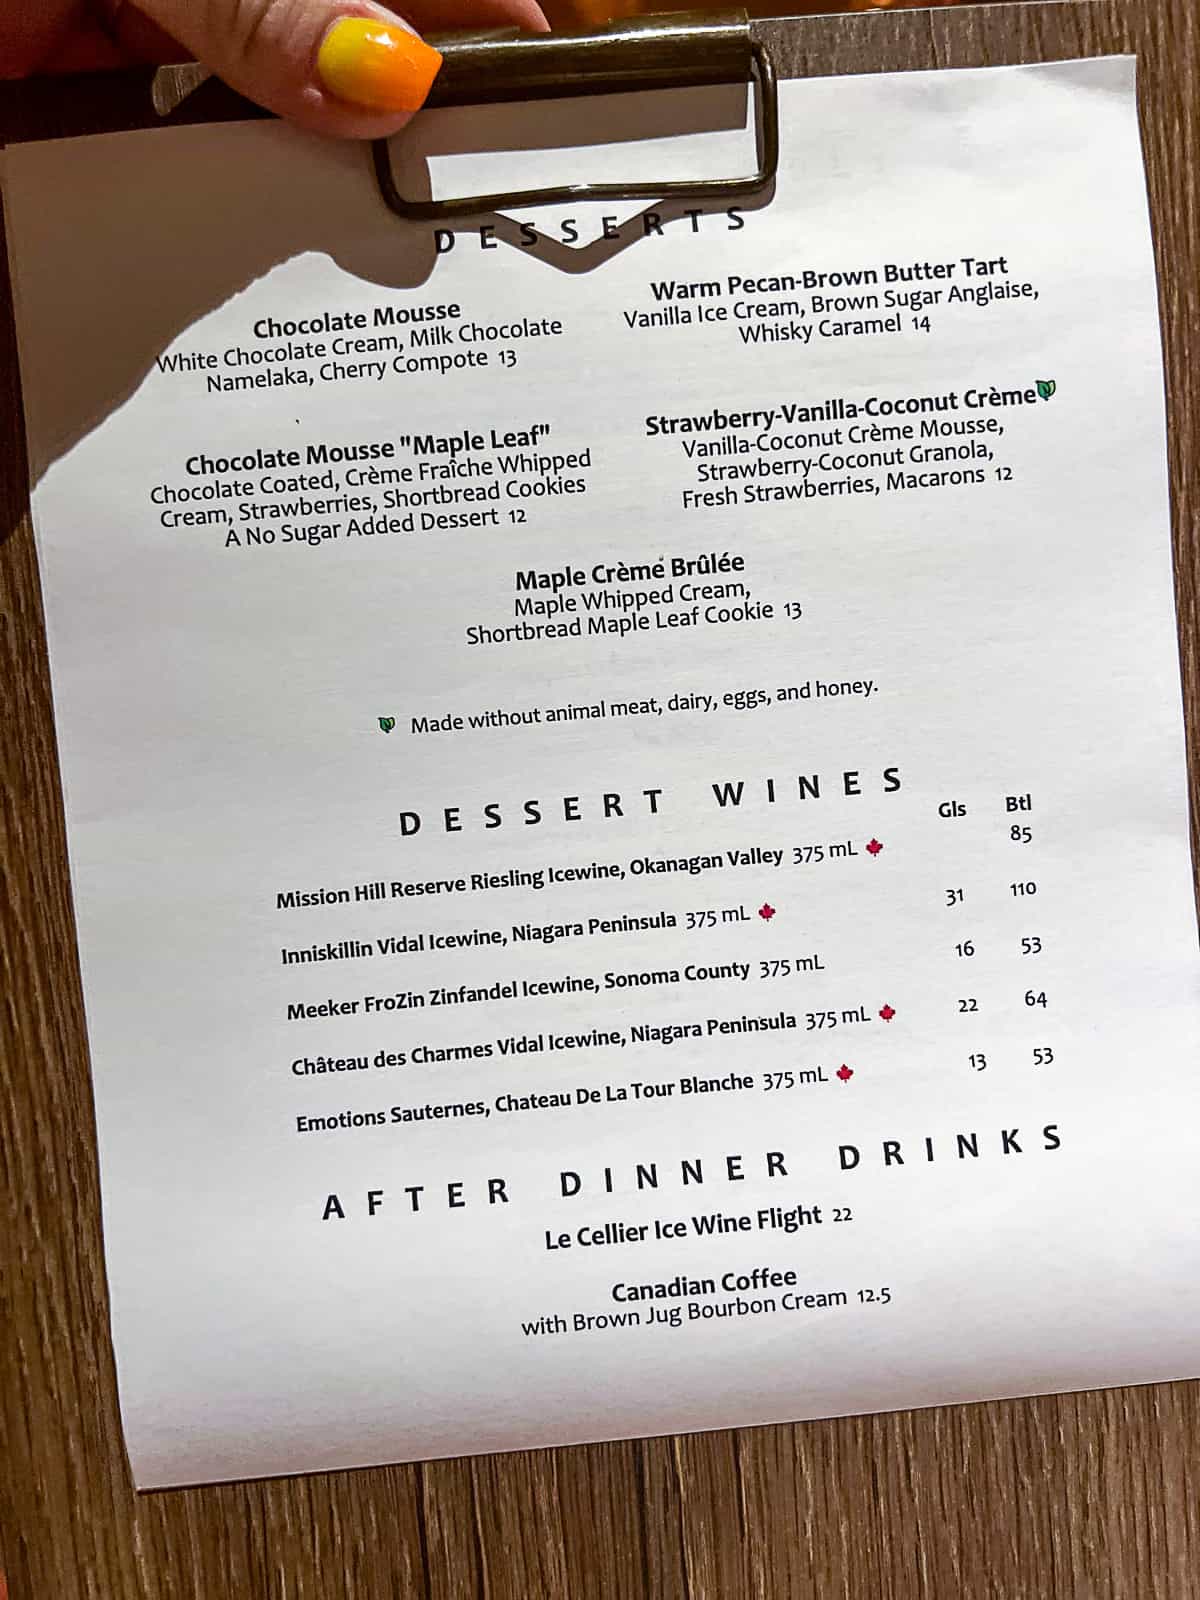 Le Cellier Ice Wine Flight Menu with Desserts in Canada Pavilion at Disney World Epcot